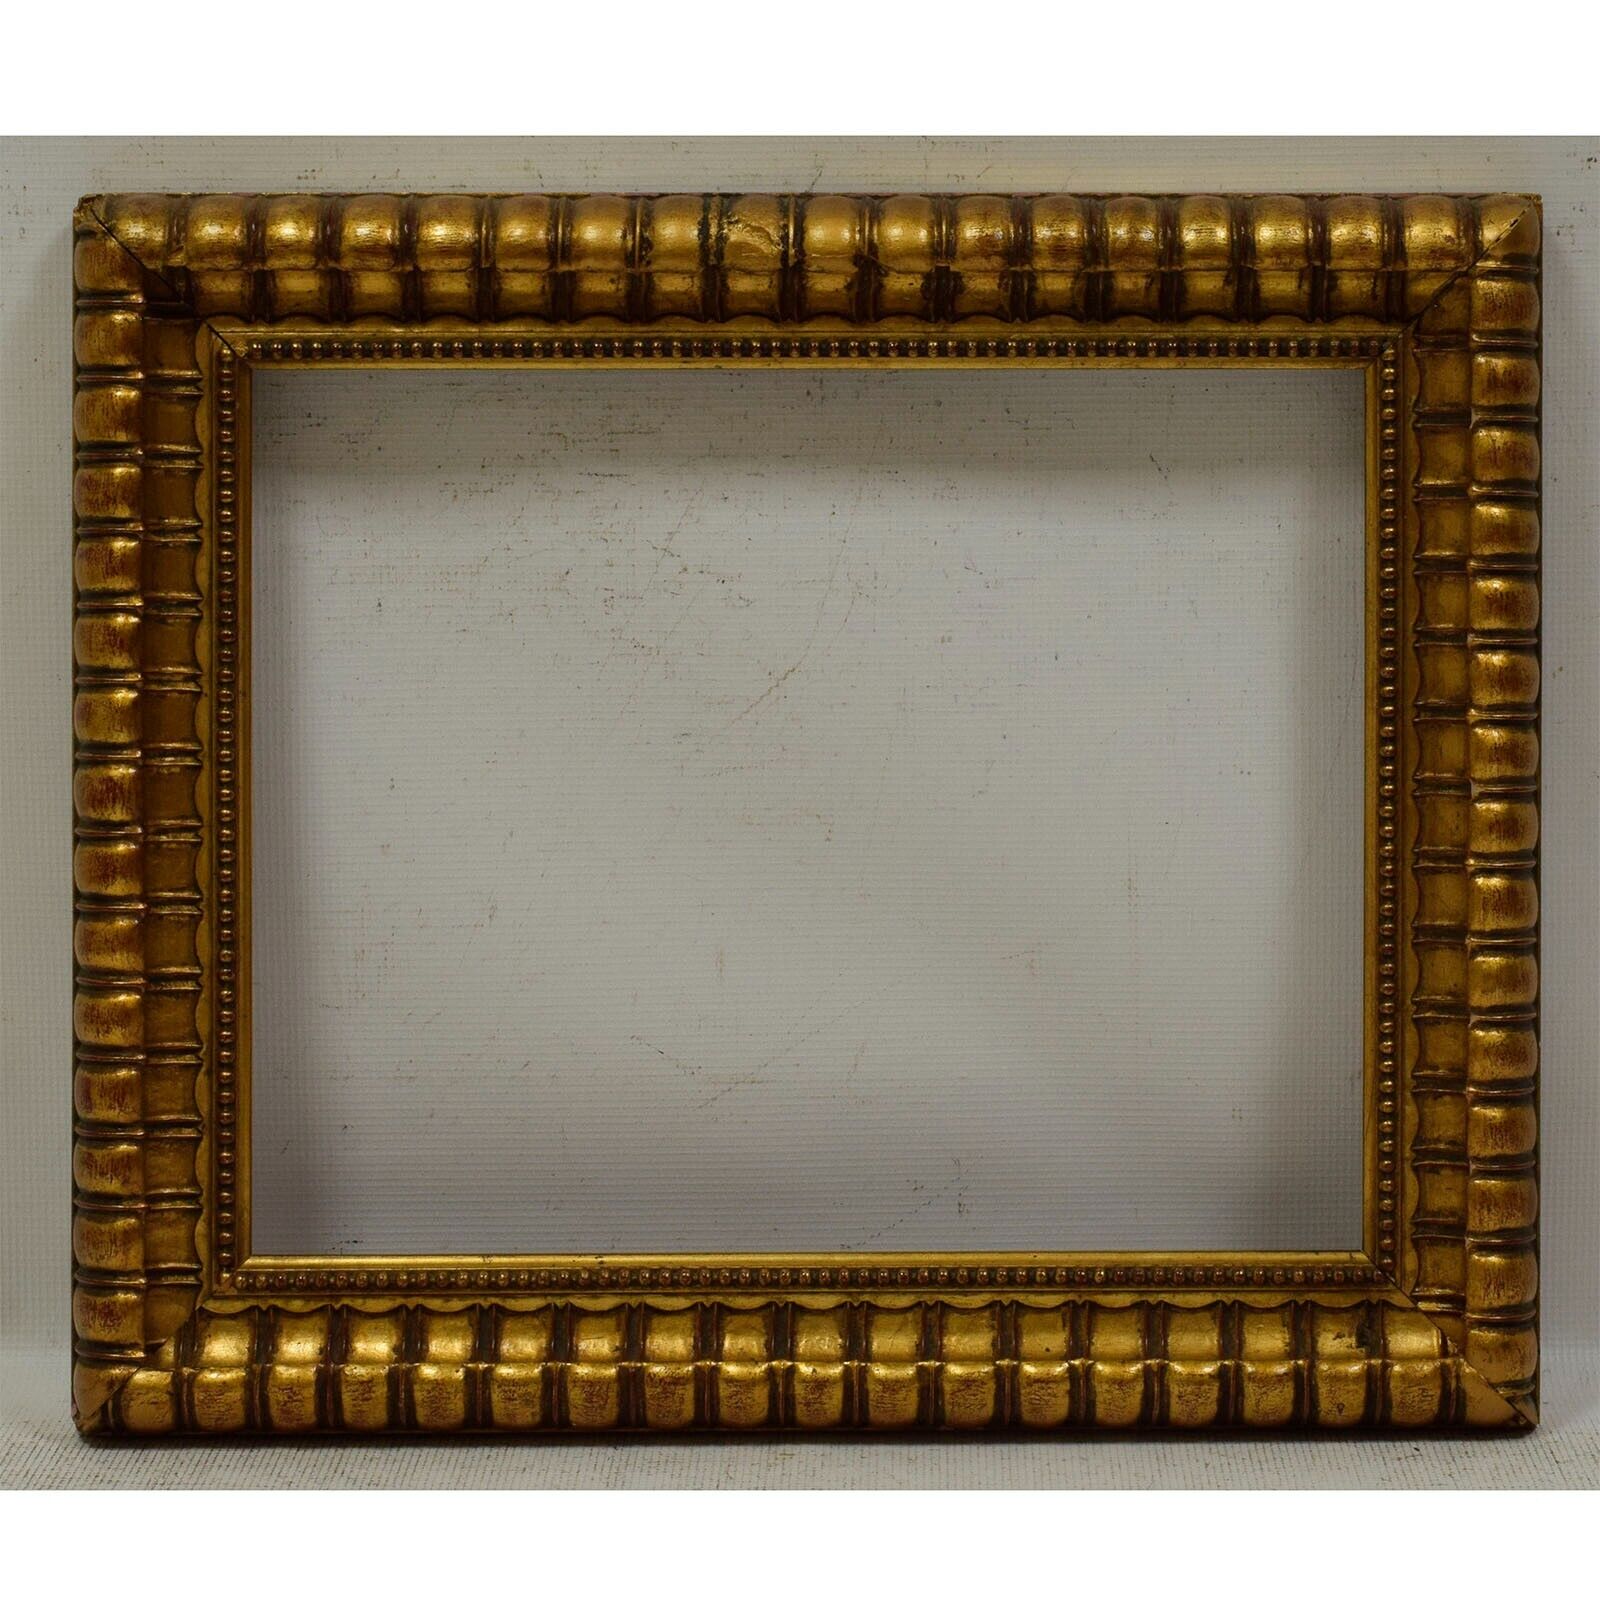 1901 Old wooden frame original condition Internal: 16.3 x 13.2 in